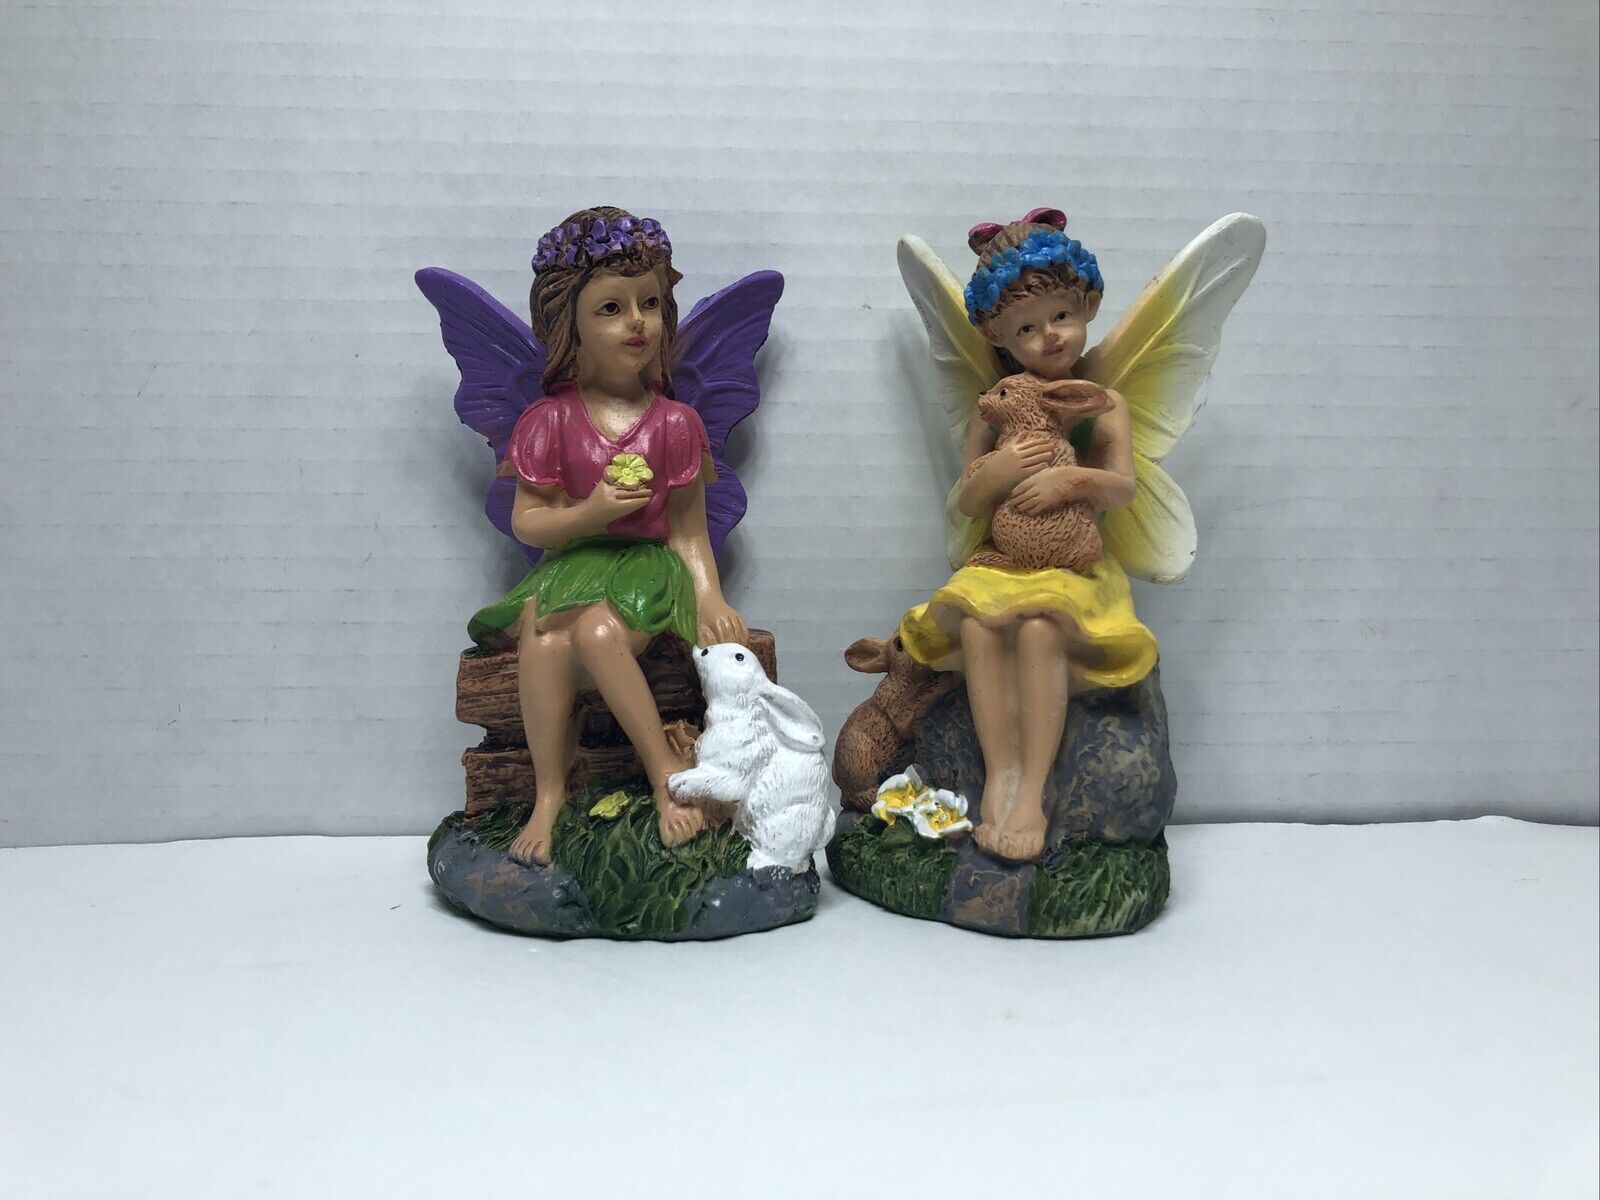 2 Fairies Bonding With Rabbits Set Of 2 Home And Garden Decor 5in Tall